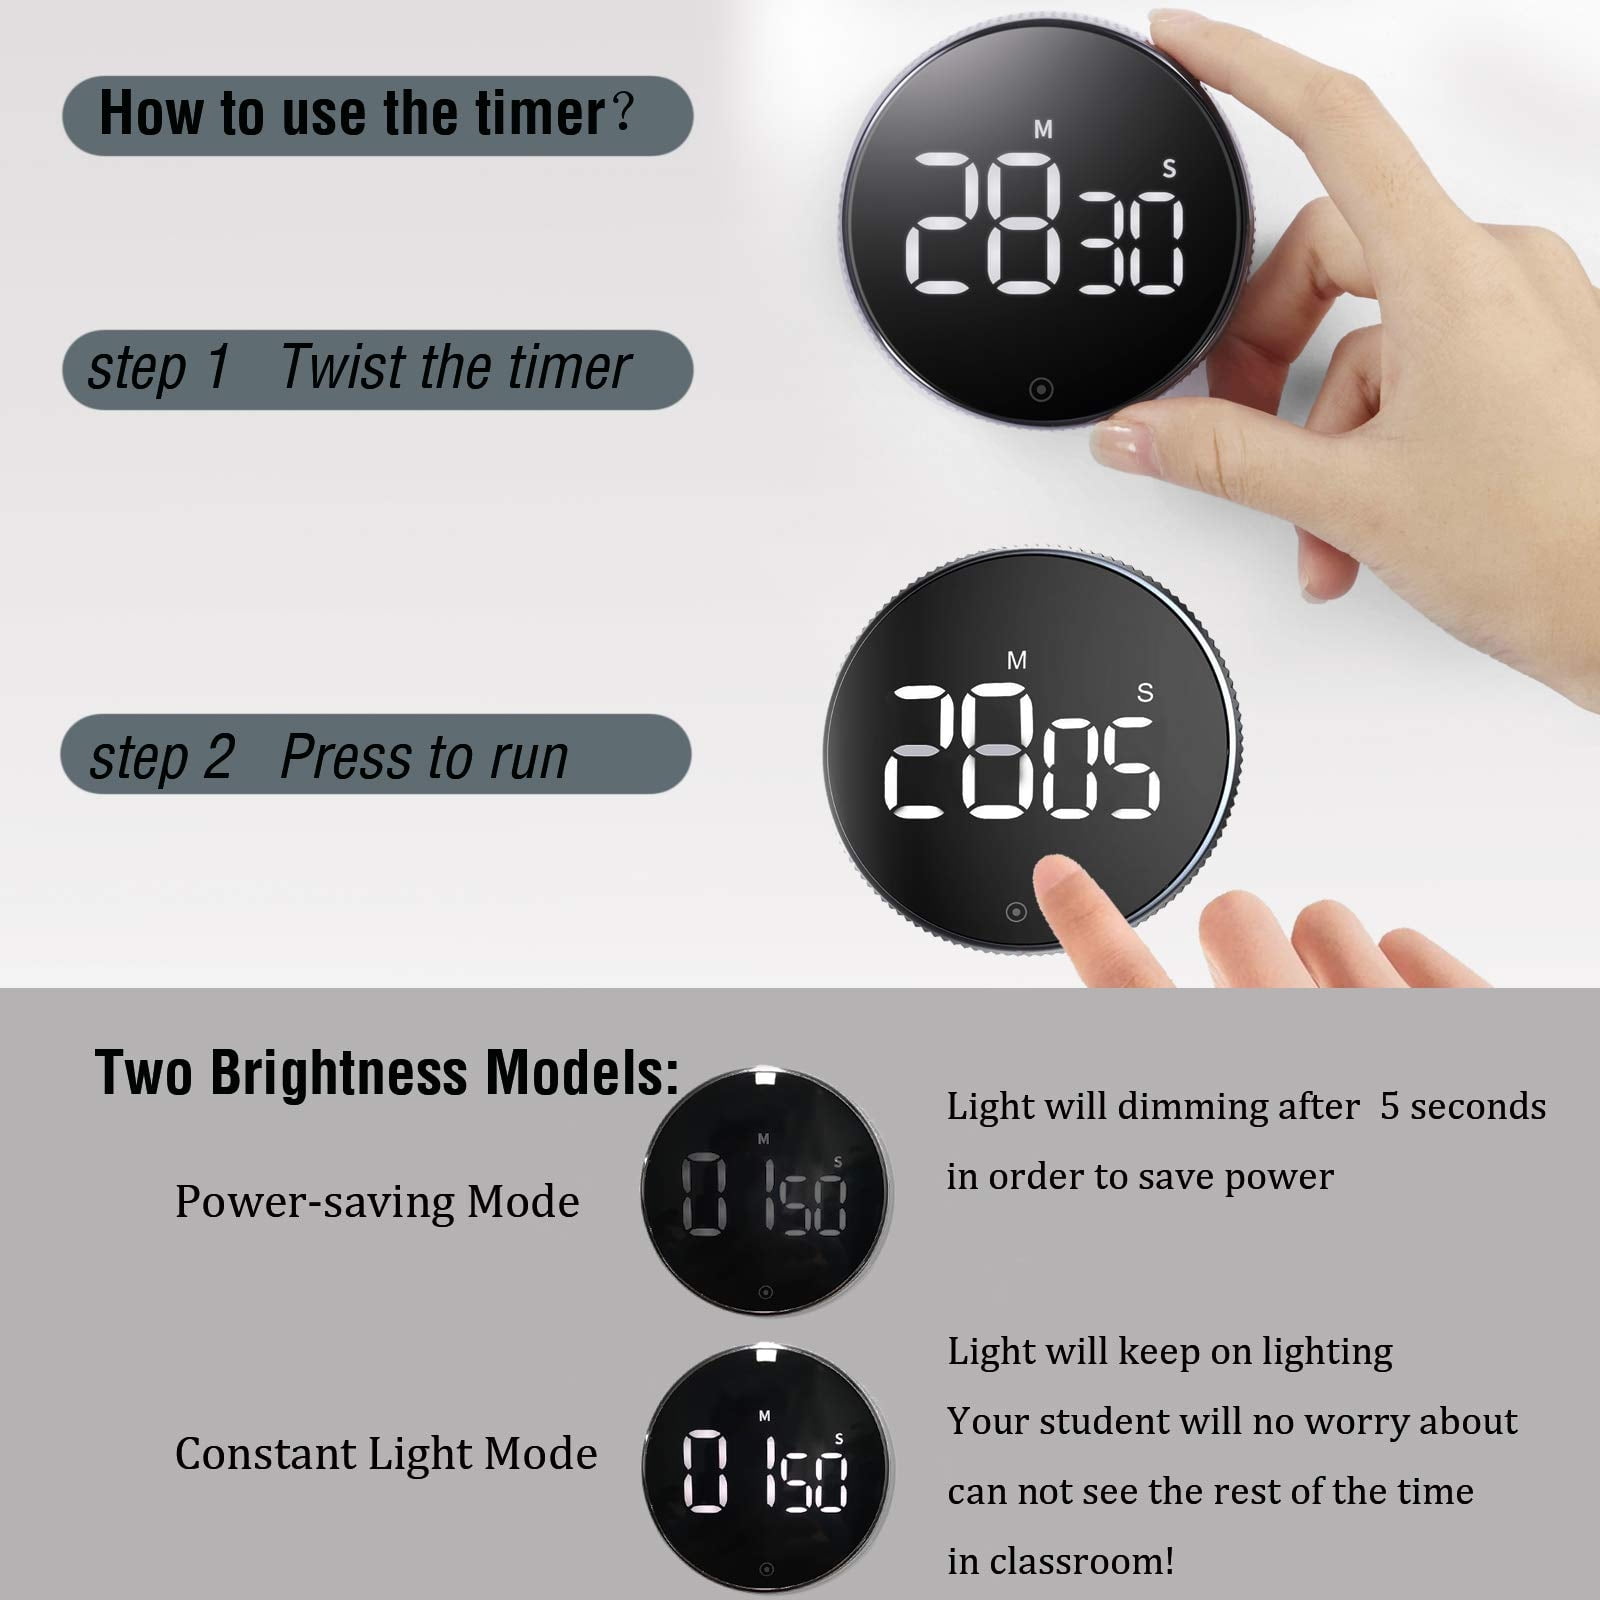 Digital Kitchen Cooking Timer: Magnetic Countdown Countup Egg Timer With  Large Led Display Adjustable Volume And Brightness, Easy To Use For Kids  Elde